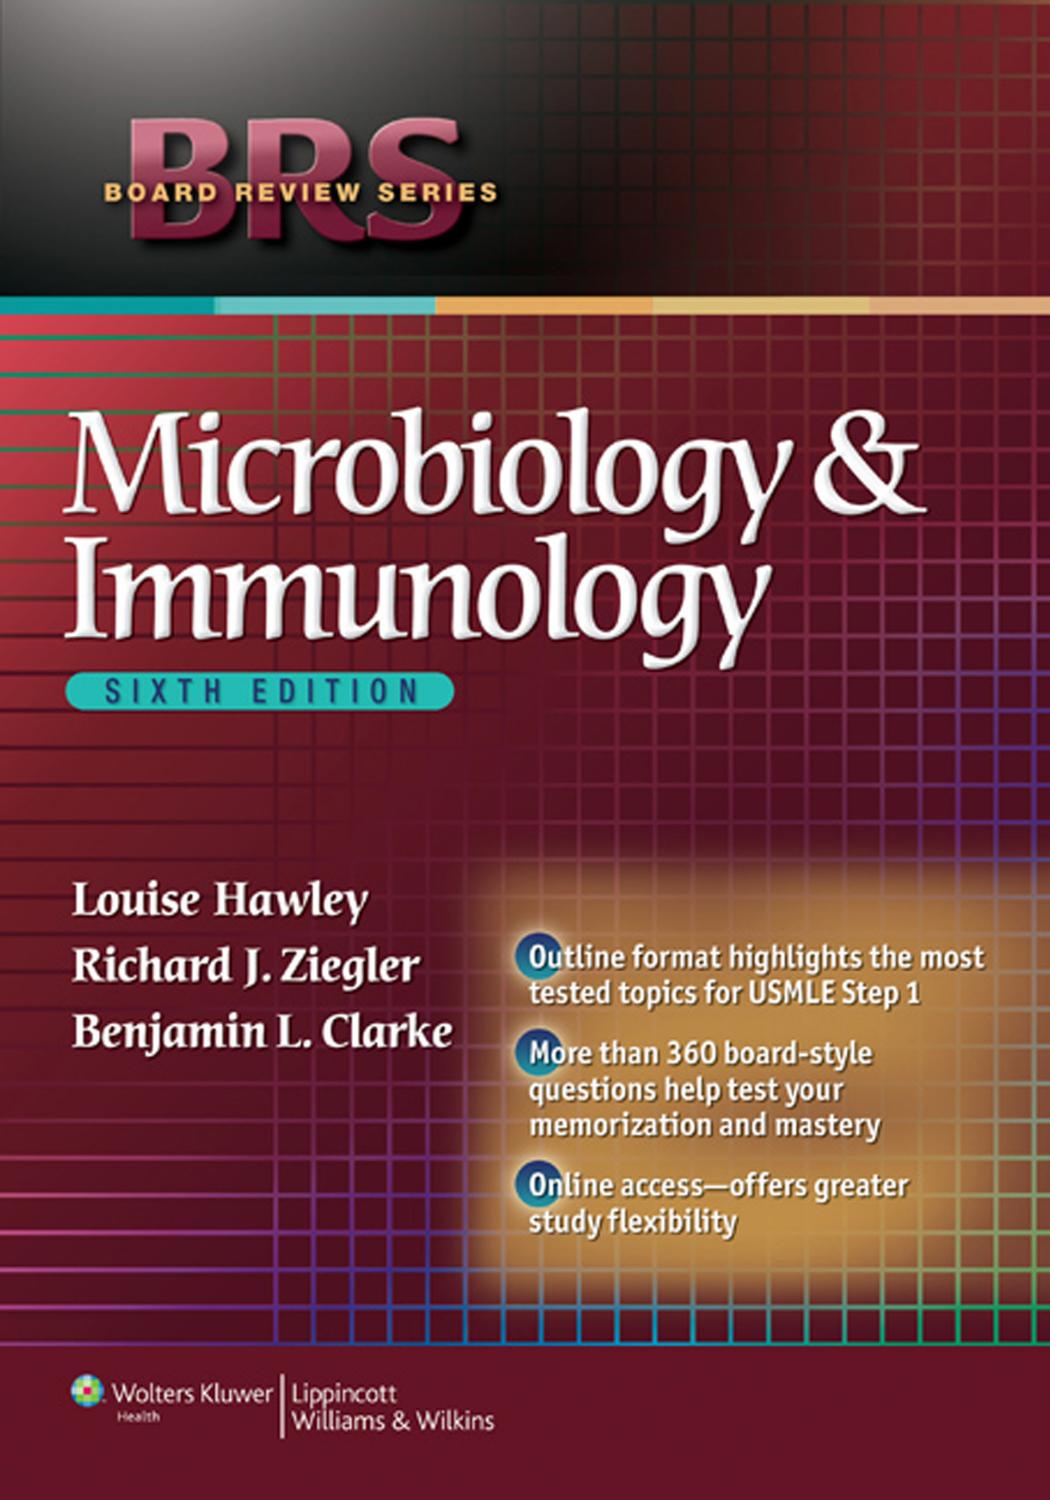 BOARD REVIEW SERIES: Microbiology and Immunology; SIXTH EDITION